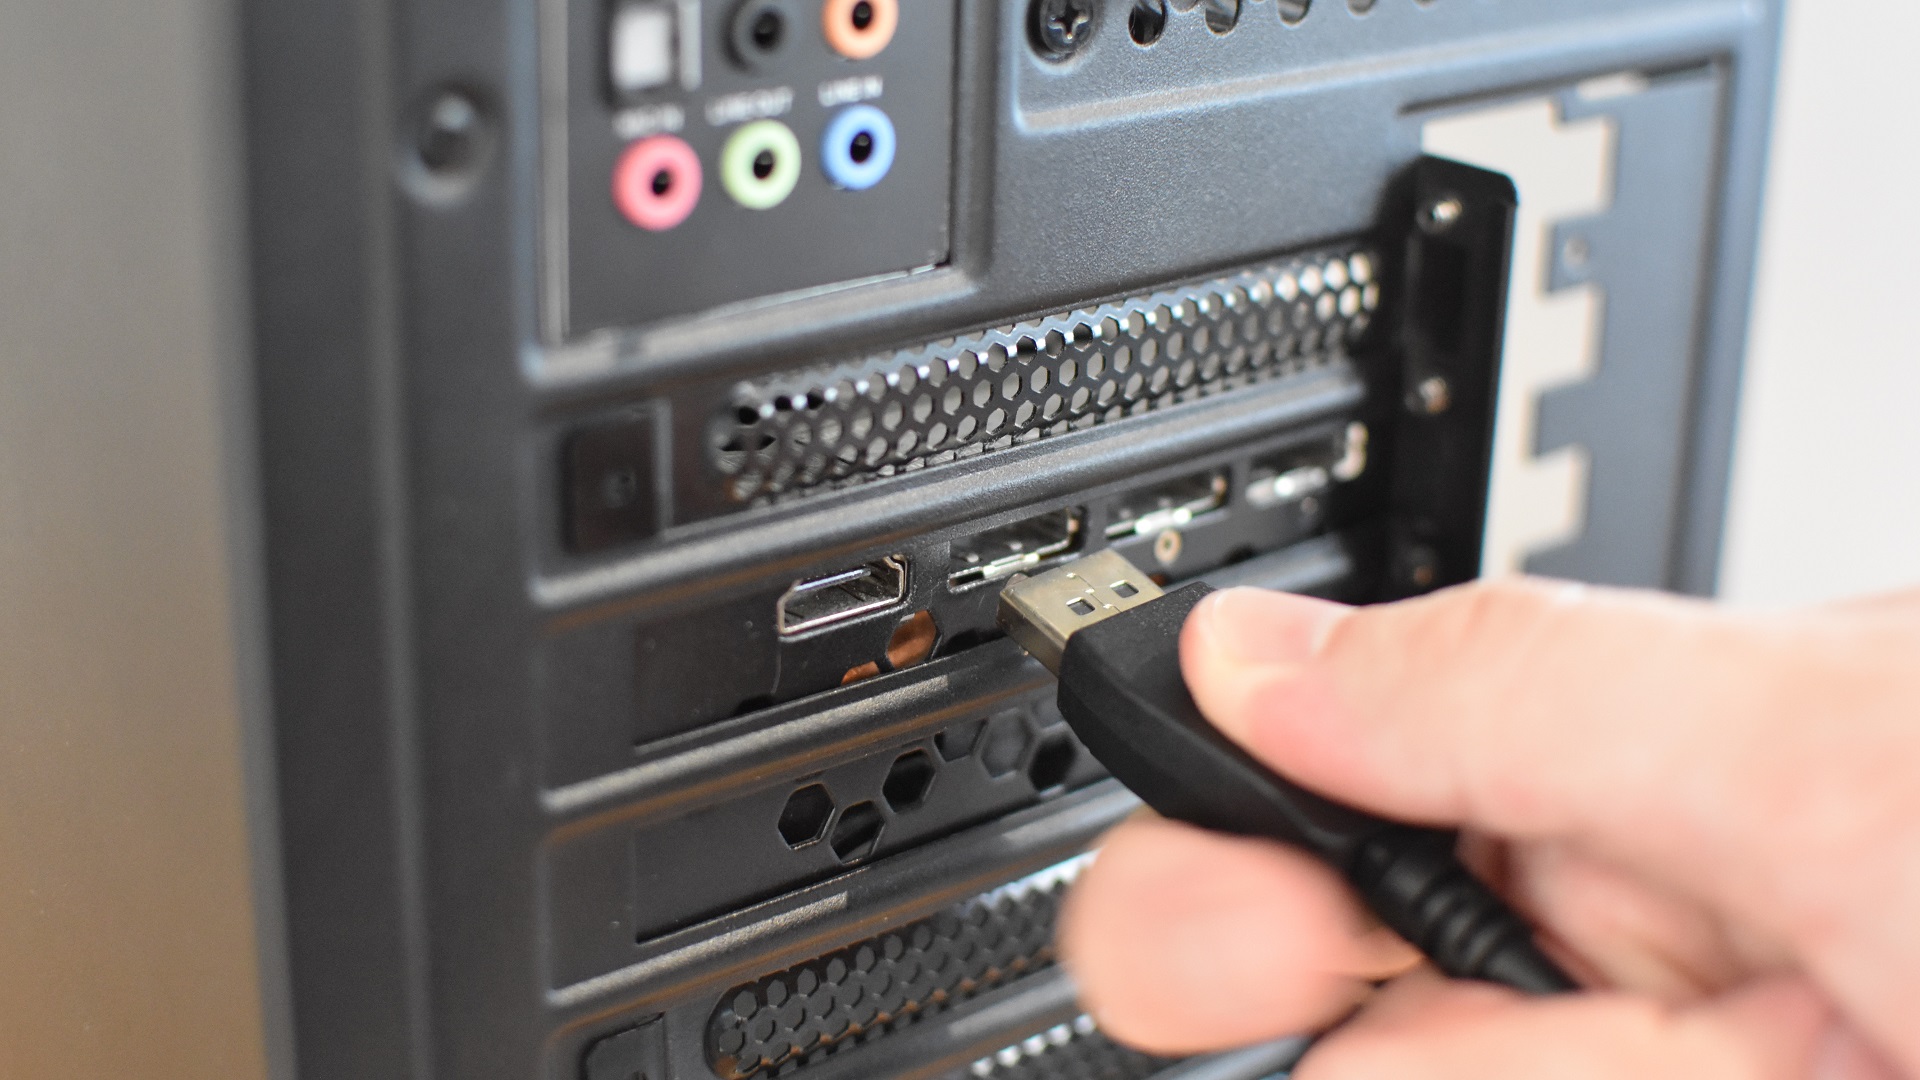 Connecting a DisplayPort cable to the rear outputs of a graphics card, which has been installed inside a gaming PC.